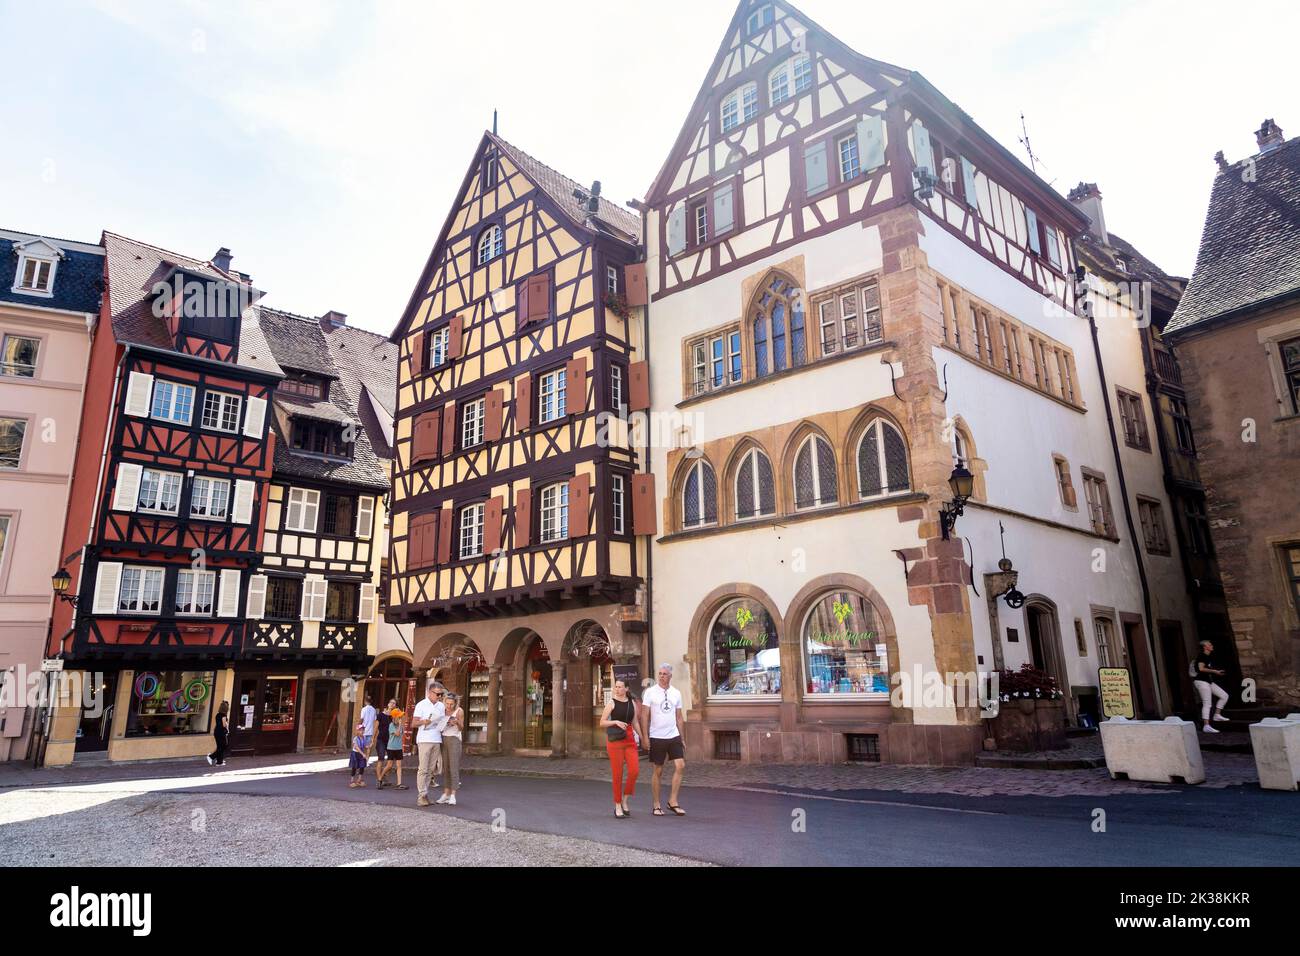 Exterior of the half-timbered 14th century Adolph House, Colmar, Alsace, France Stock Photo